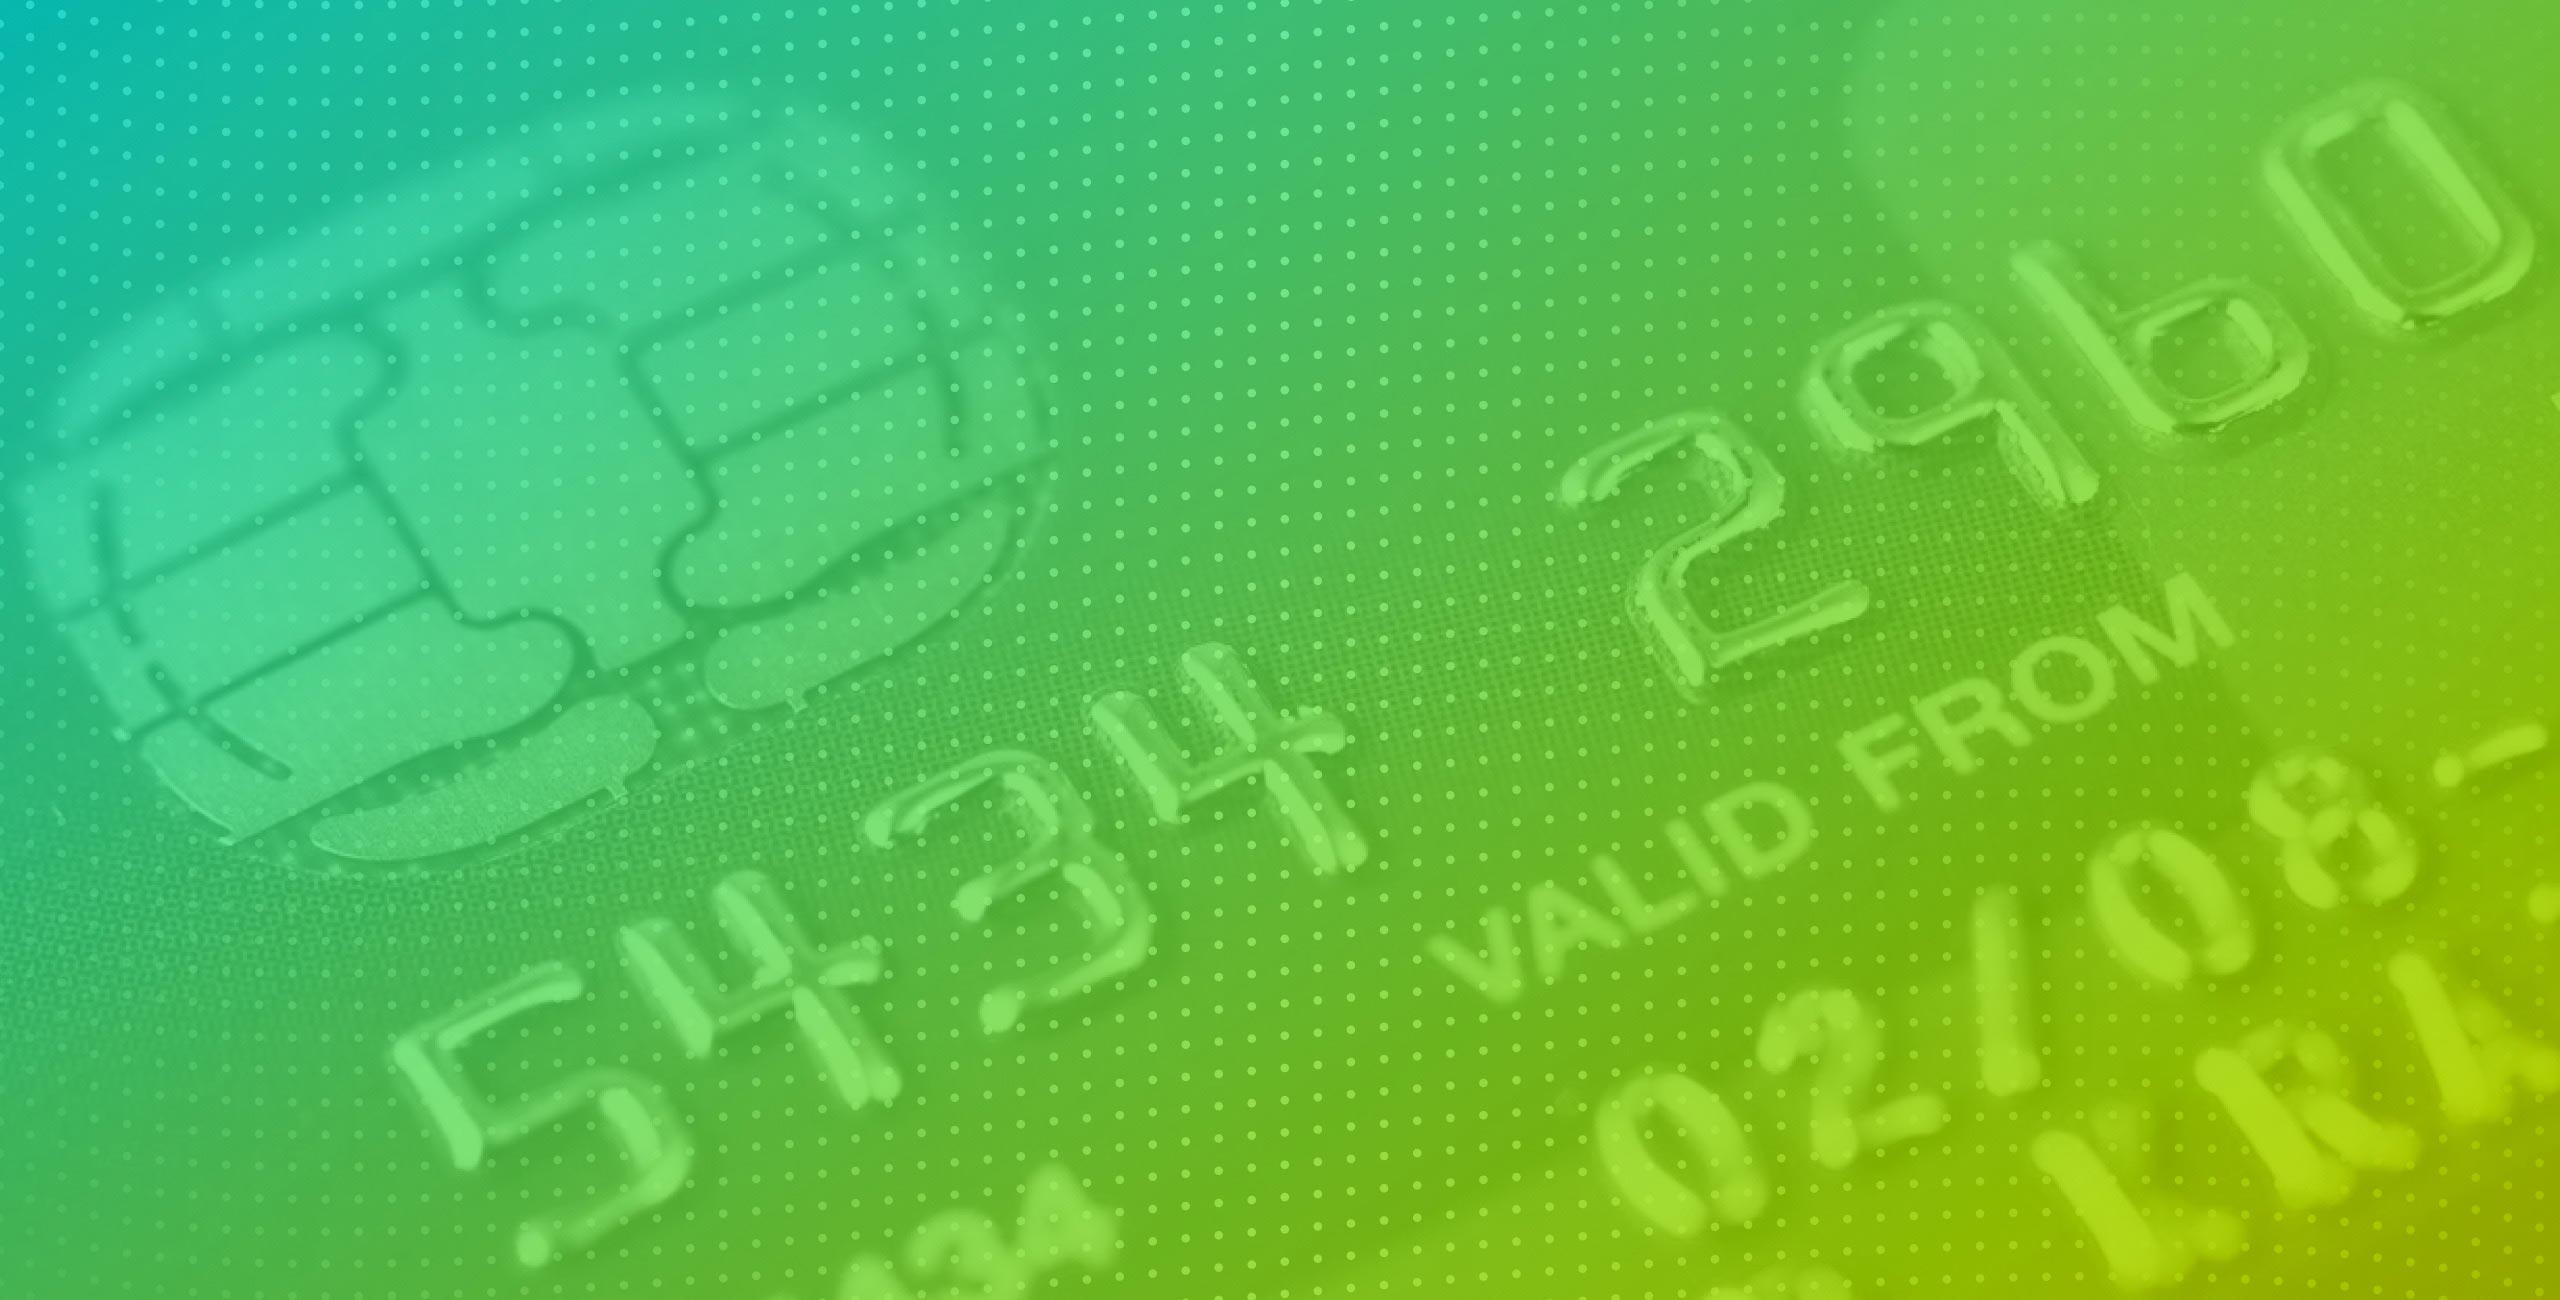 A credit card on a colorful background.